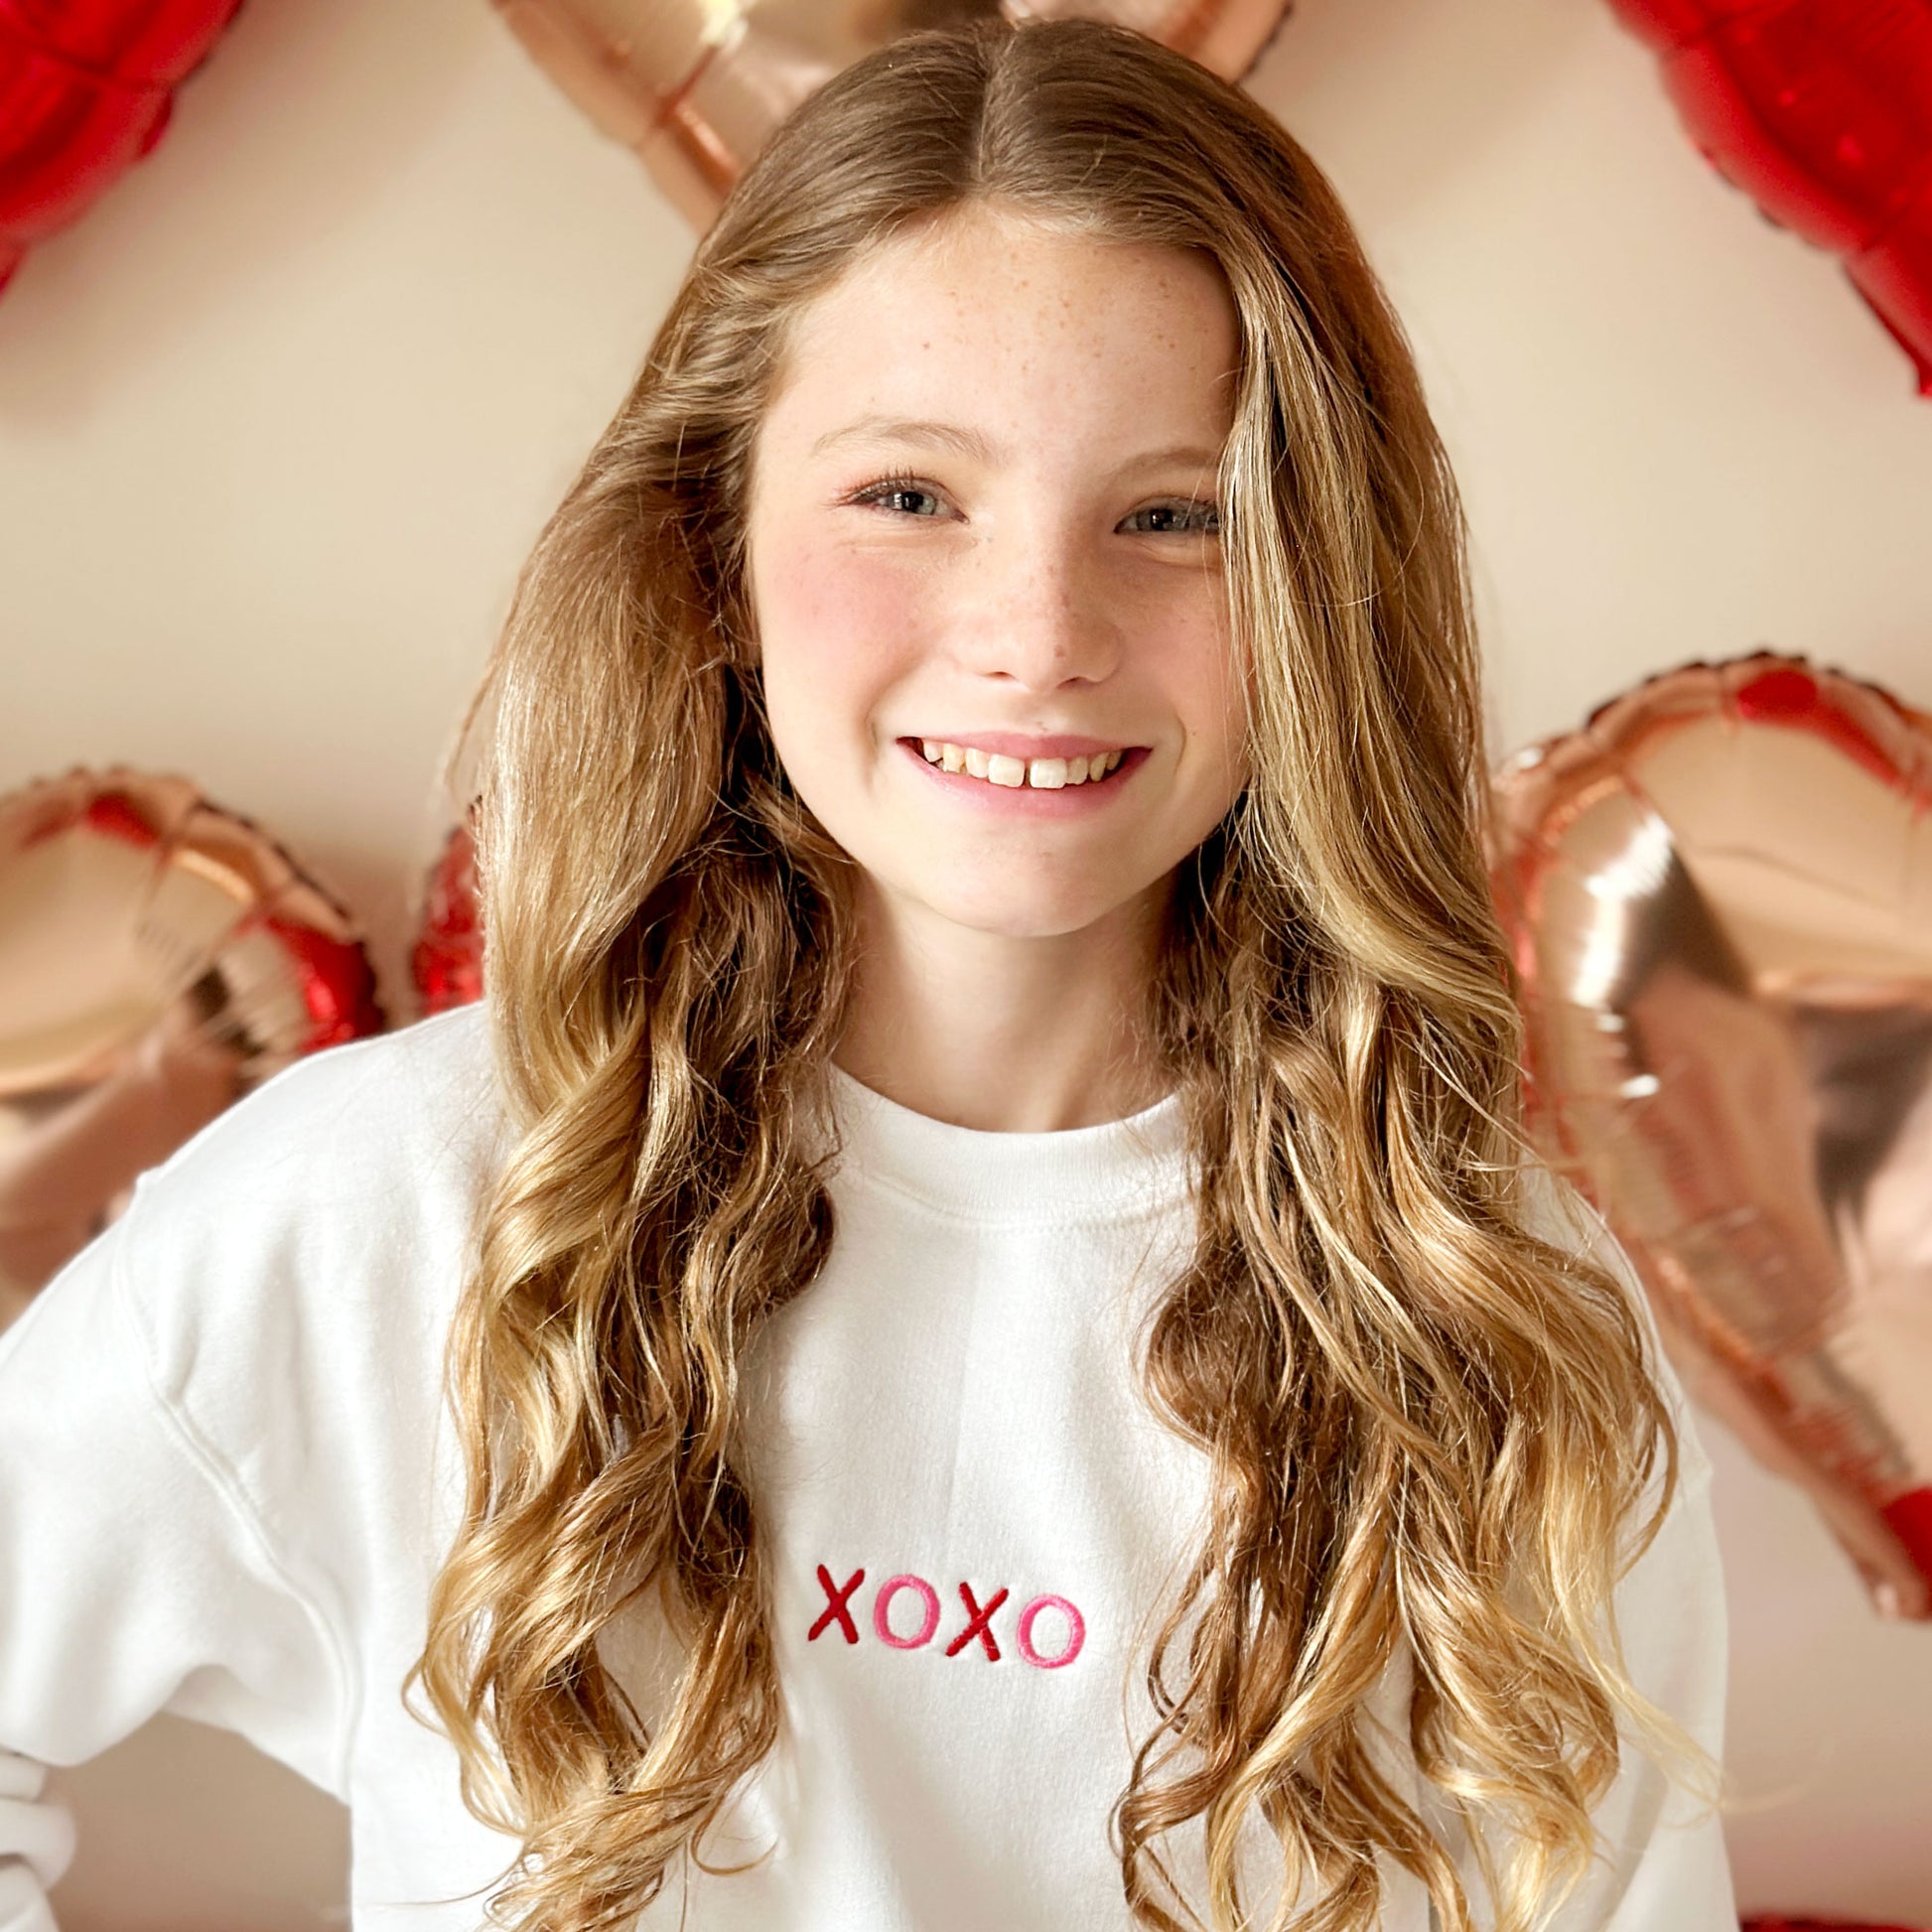 young girl wearing a white sweatshirt with an xoxo embroidered valentine's design